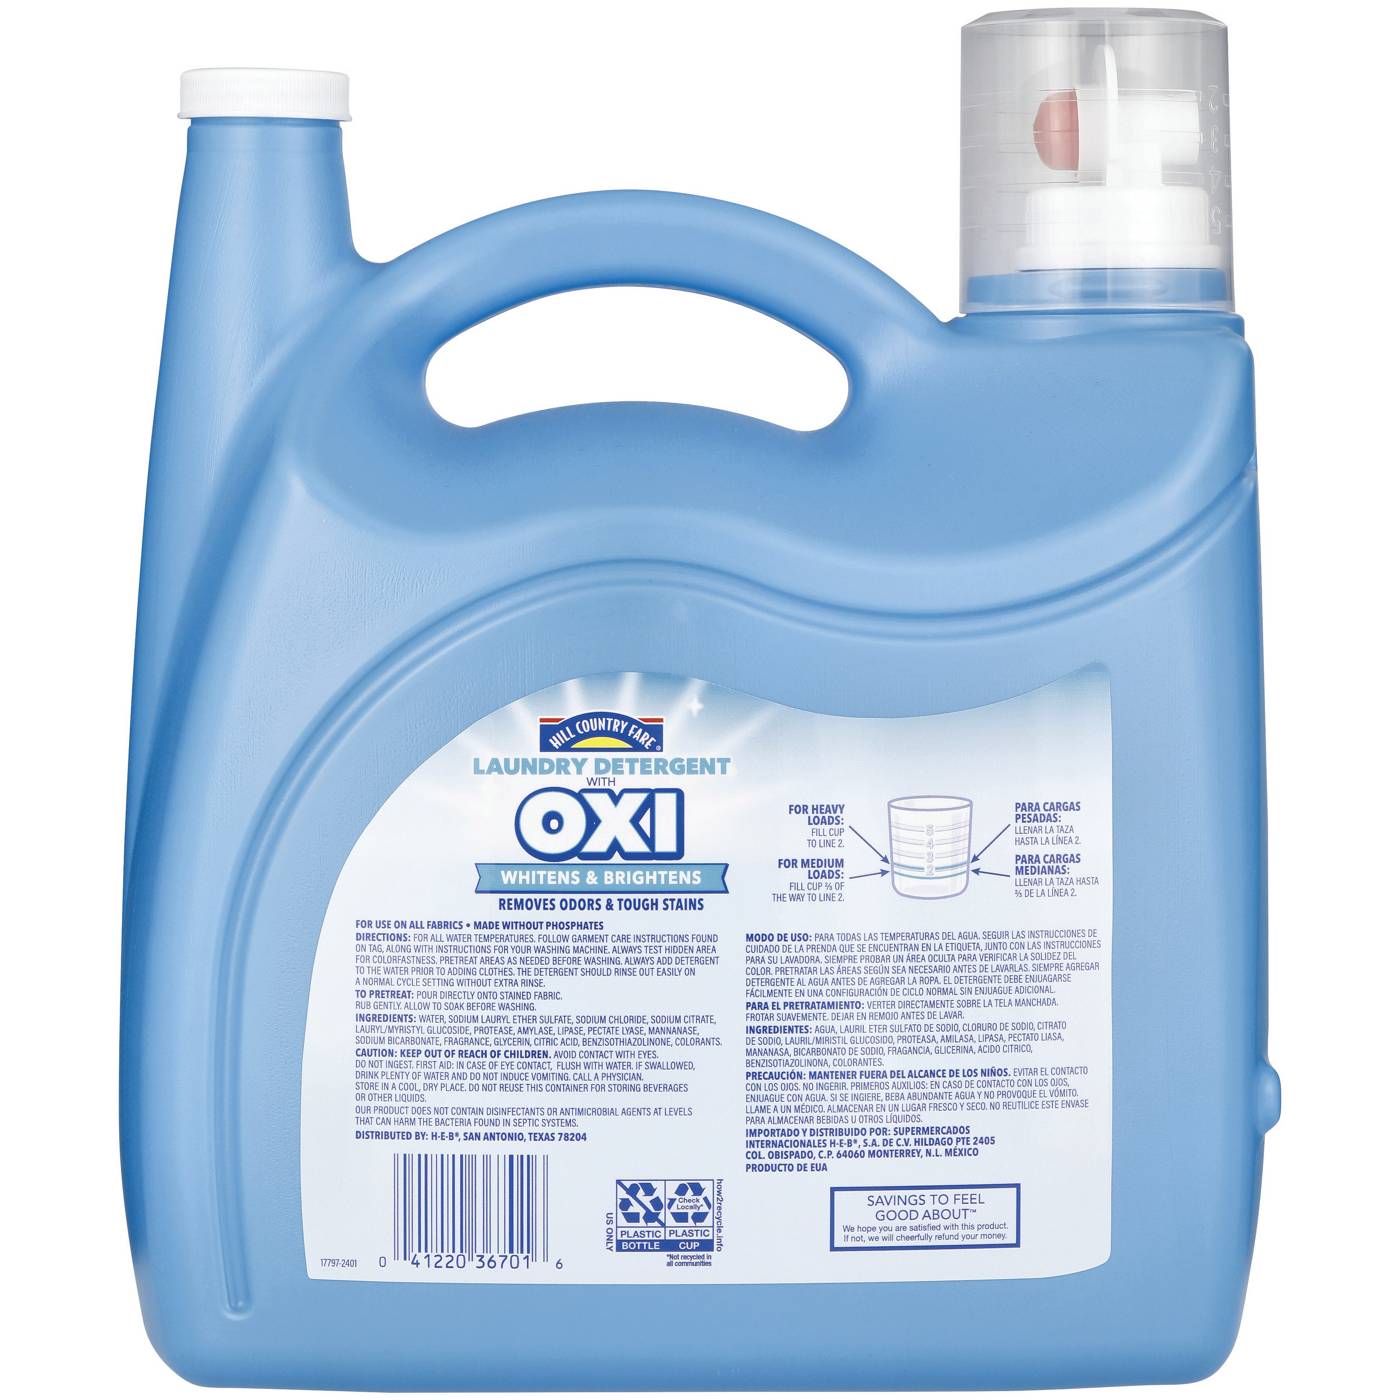 Hill Country Fare OXI HE Liquid Laundry Detergent, 157 Loads – Fresh Scent; image 2 of 3